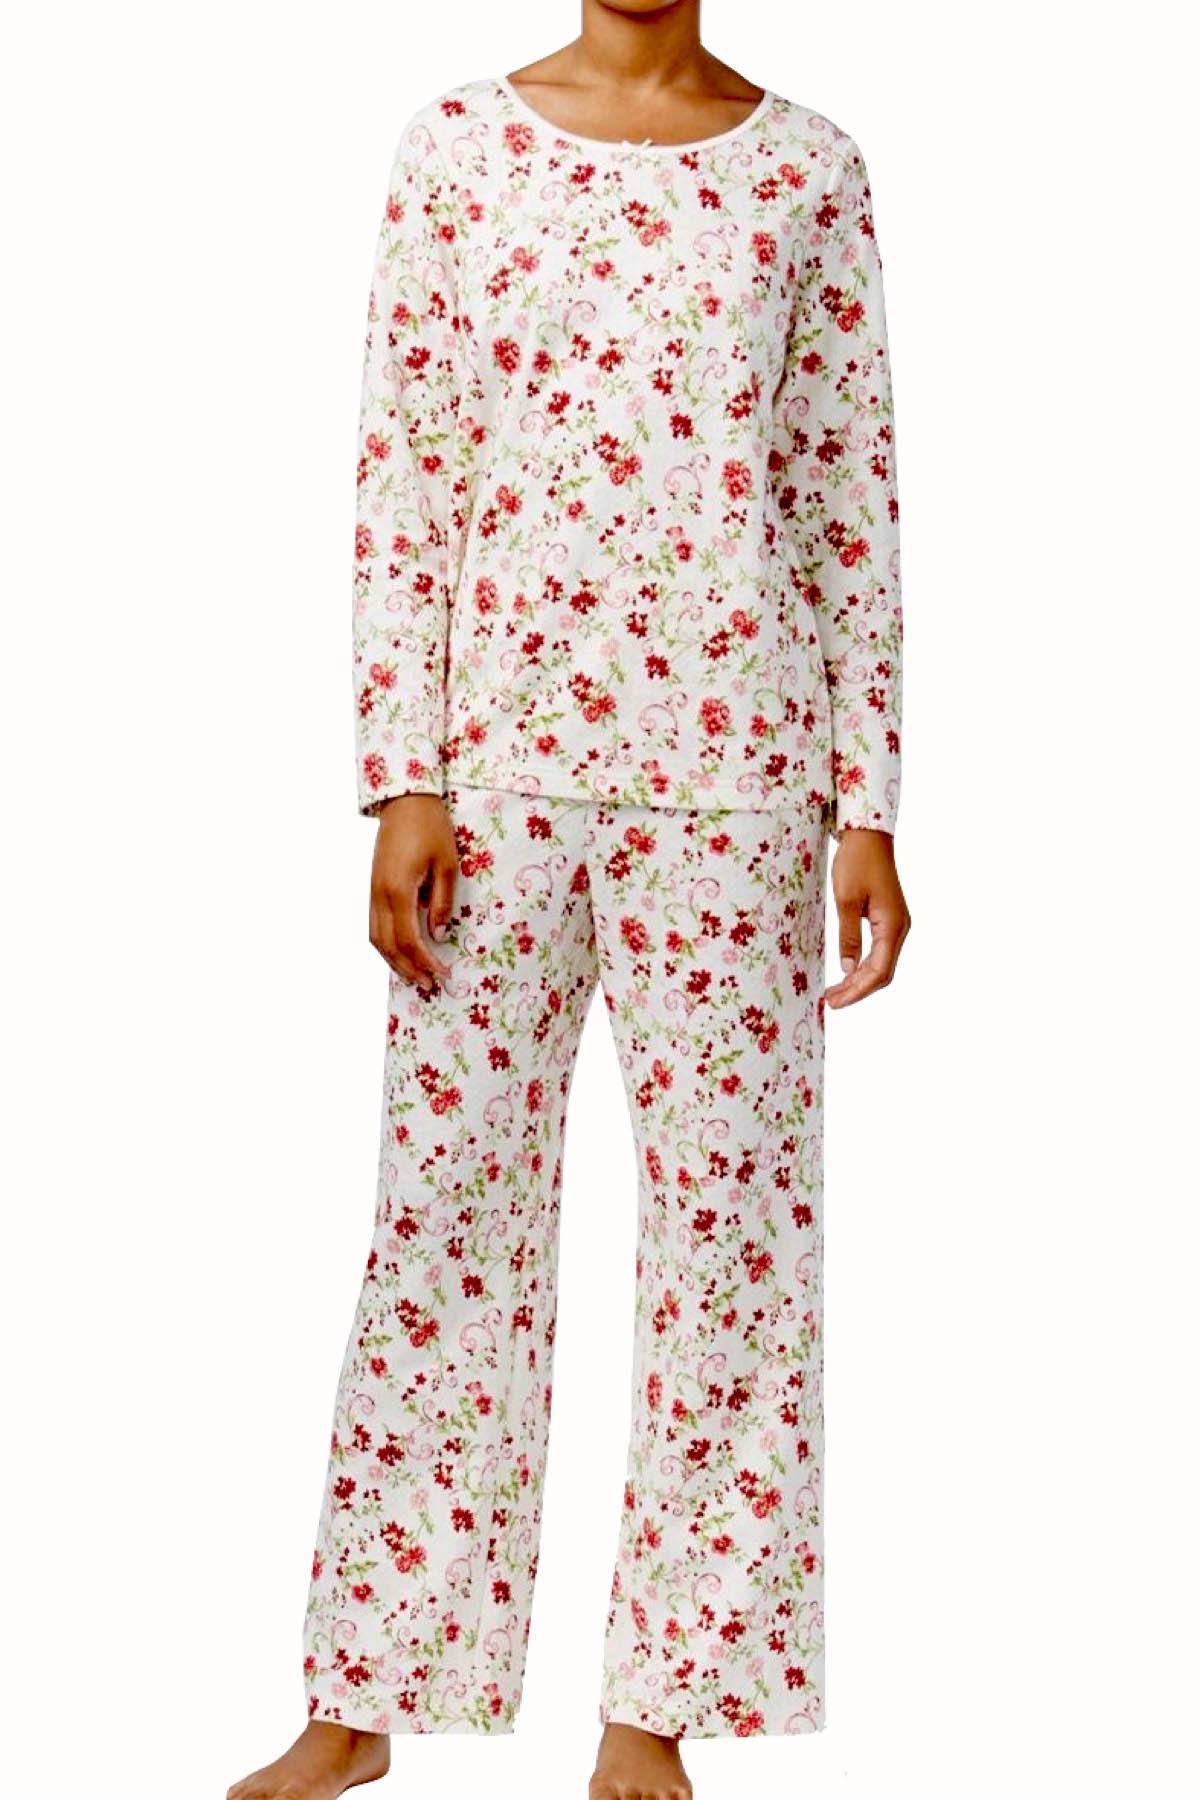 Charter Club Intimates Holiday-Floral Printed Knit PJ 2-Piece Set